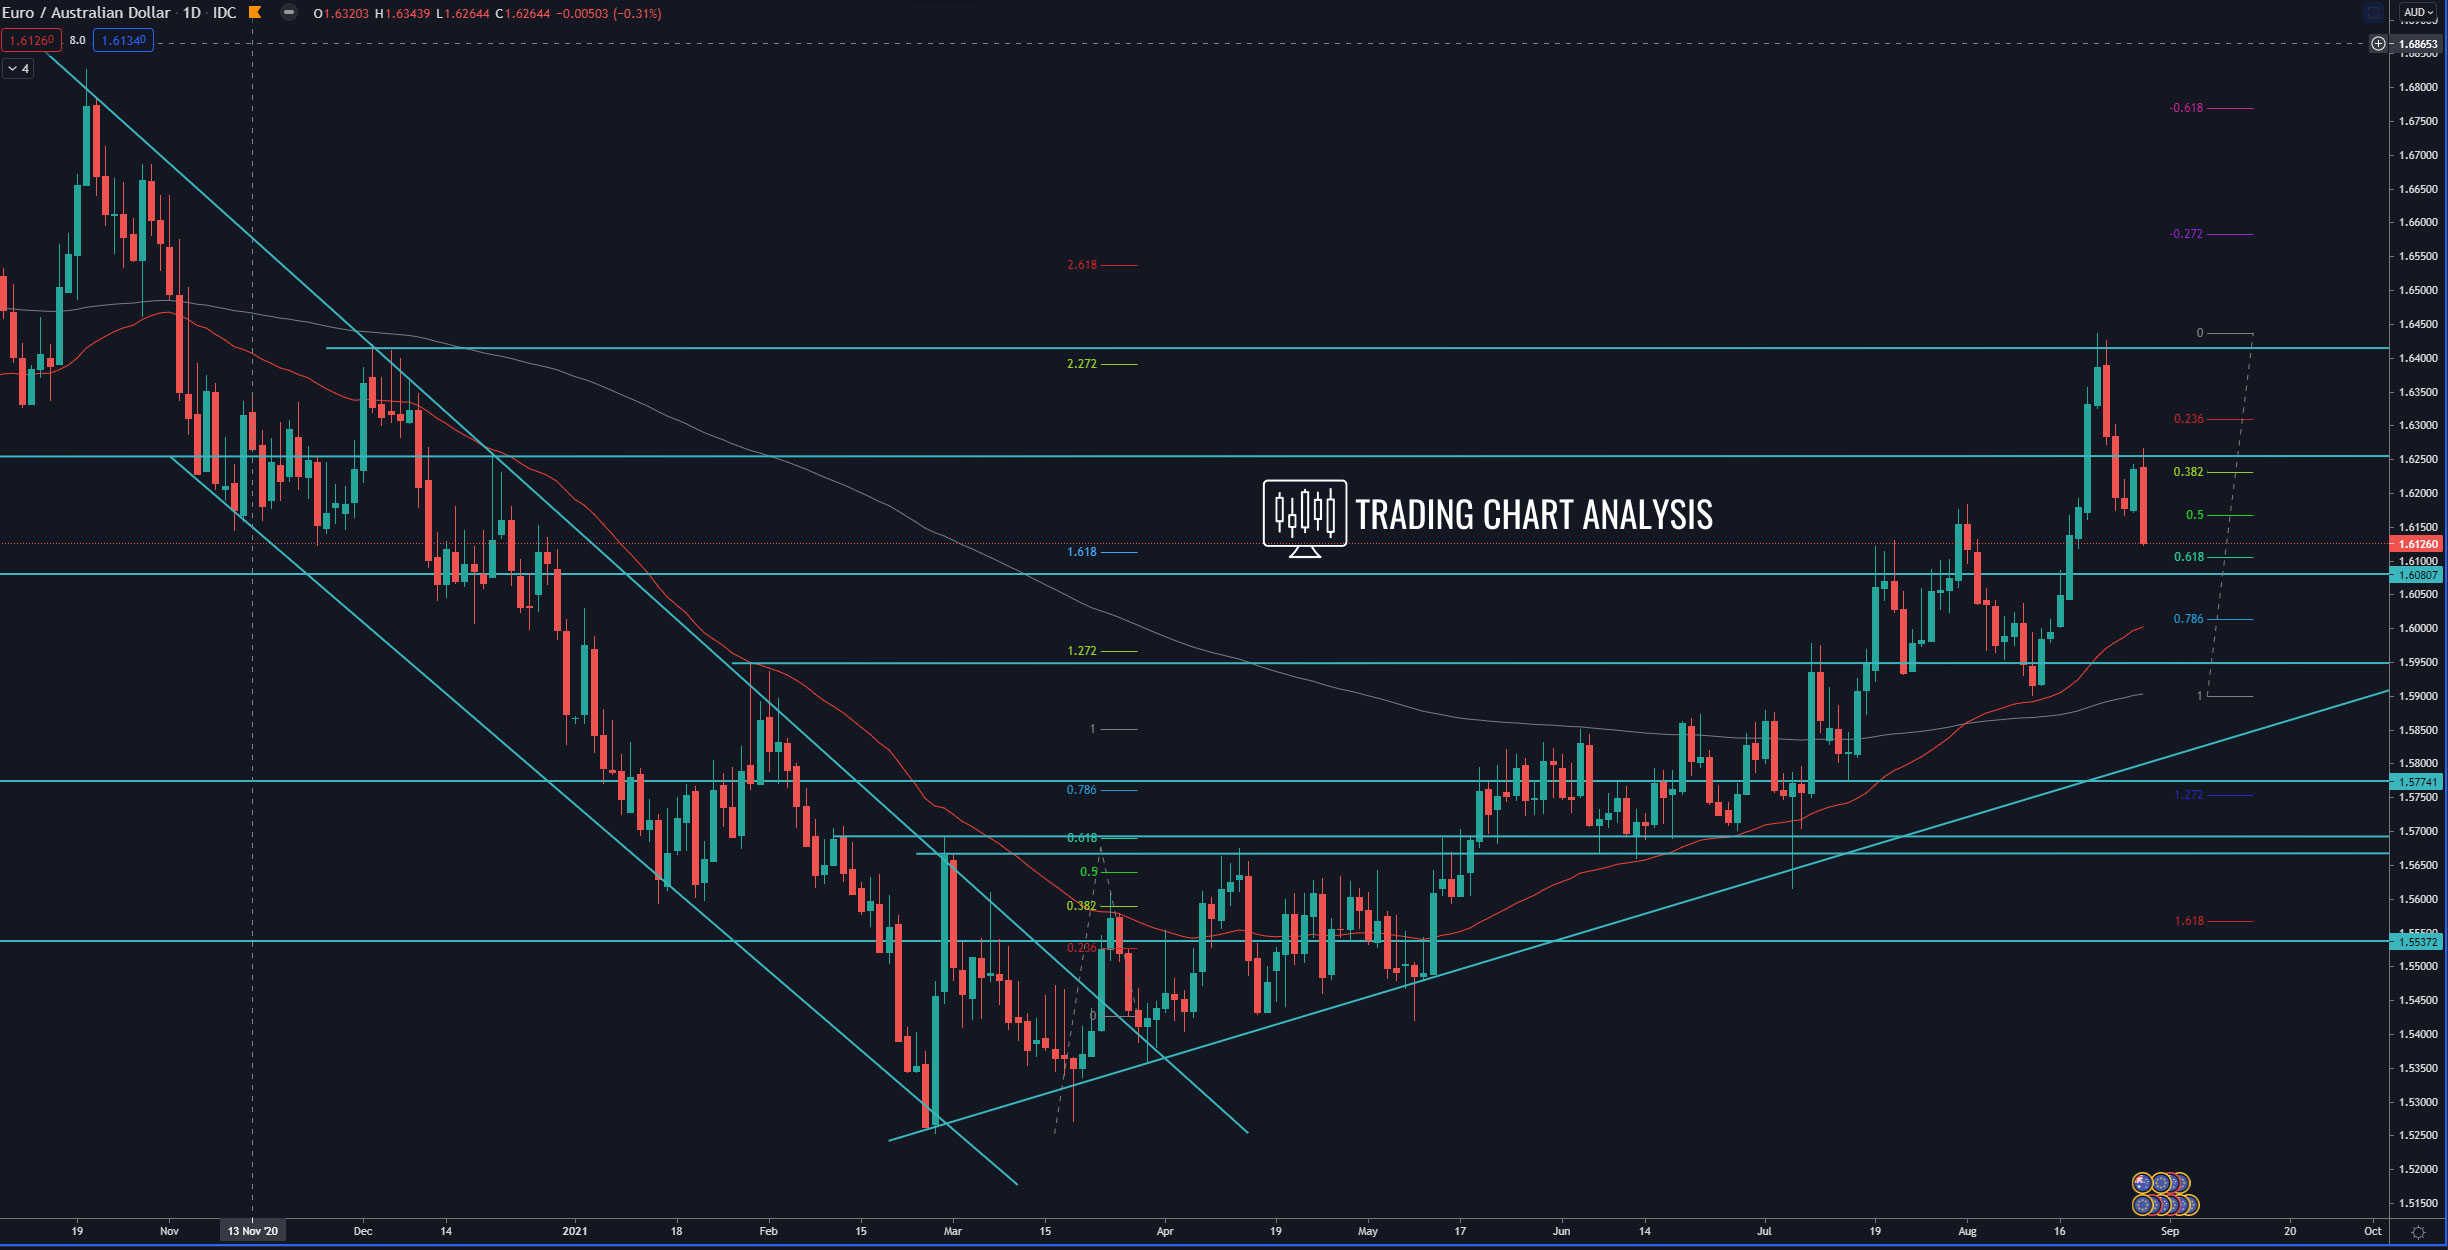 EUR/AUD daily chart, technical analysis for trading/investing